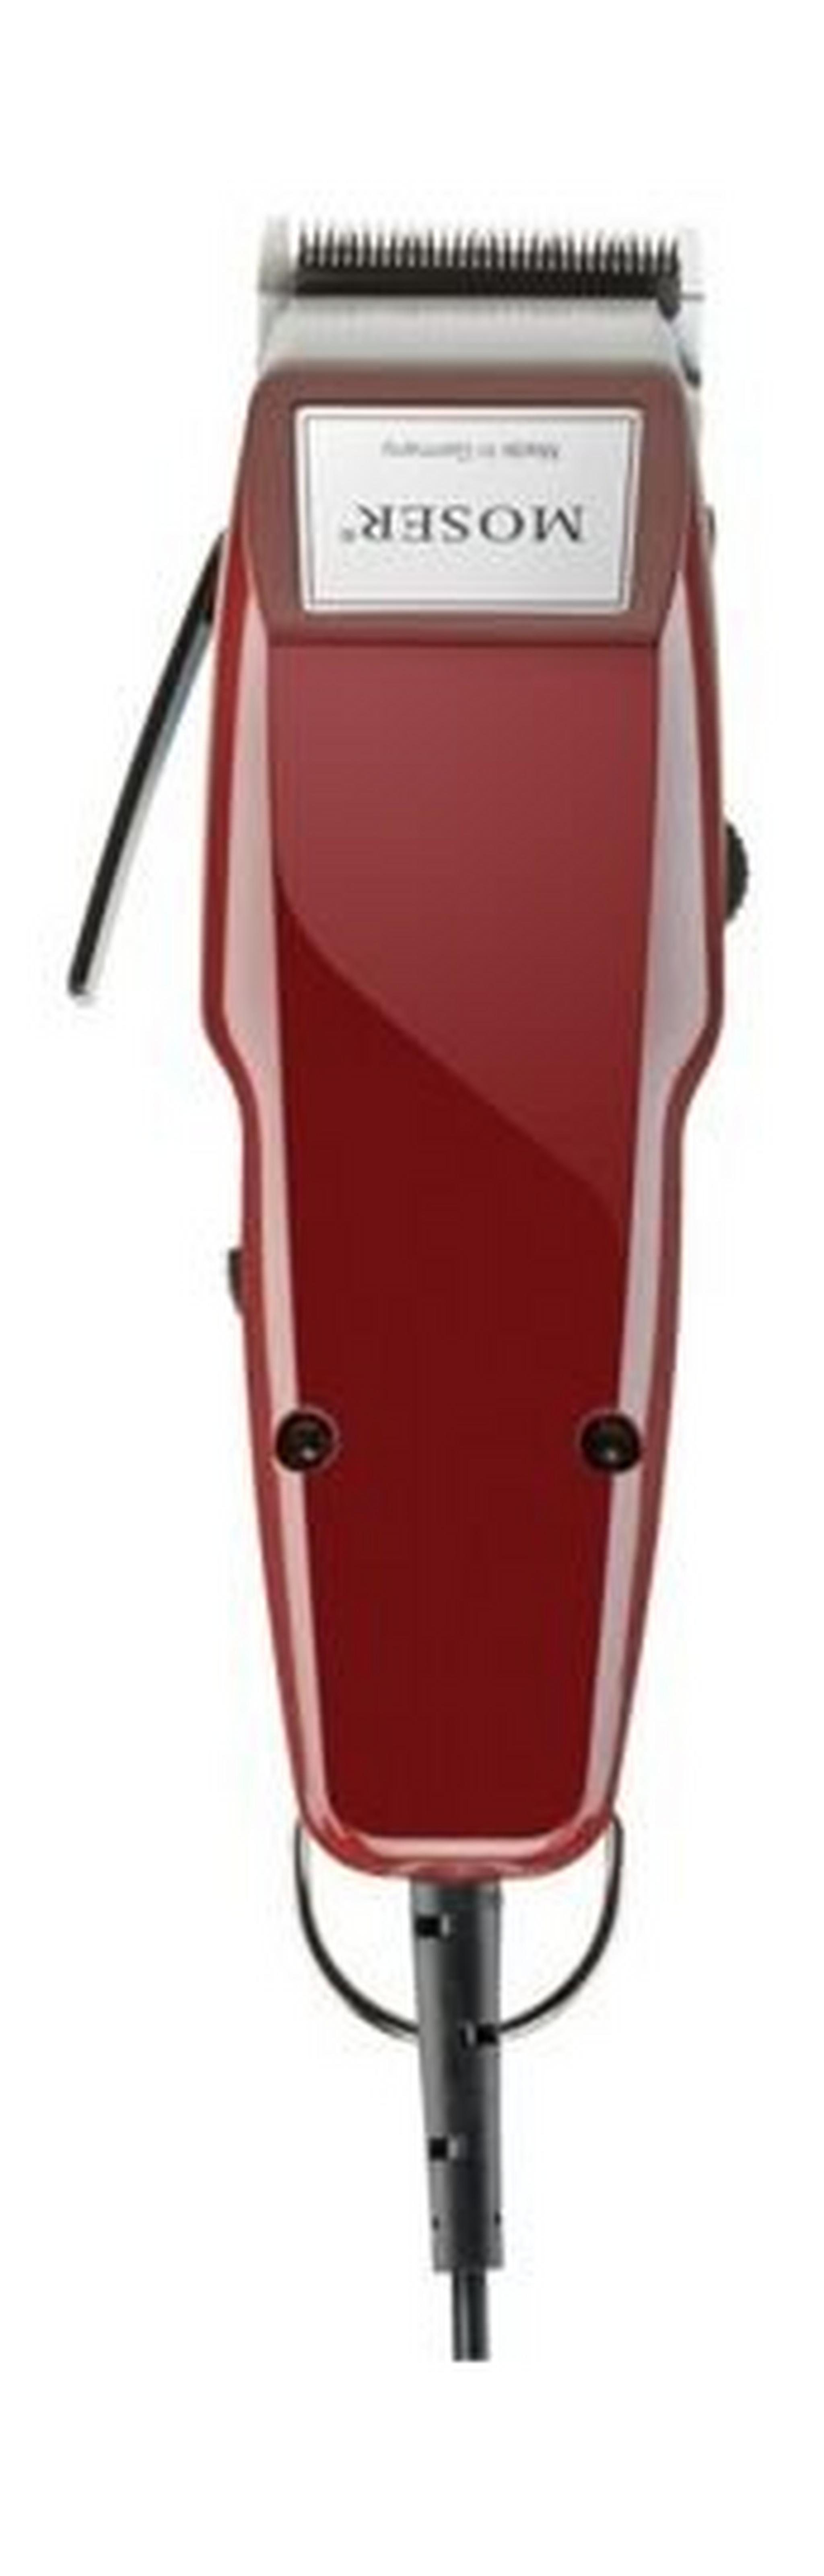 Moser Classic Professional Hair Clipper & Trimmer, 1400-0050 - Red